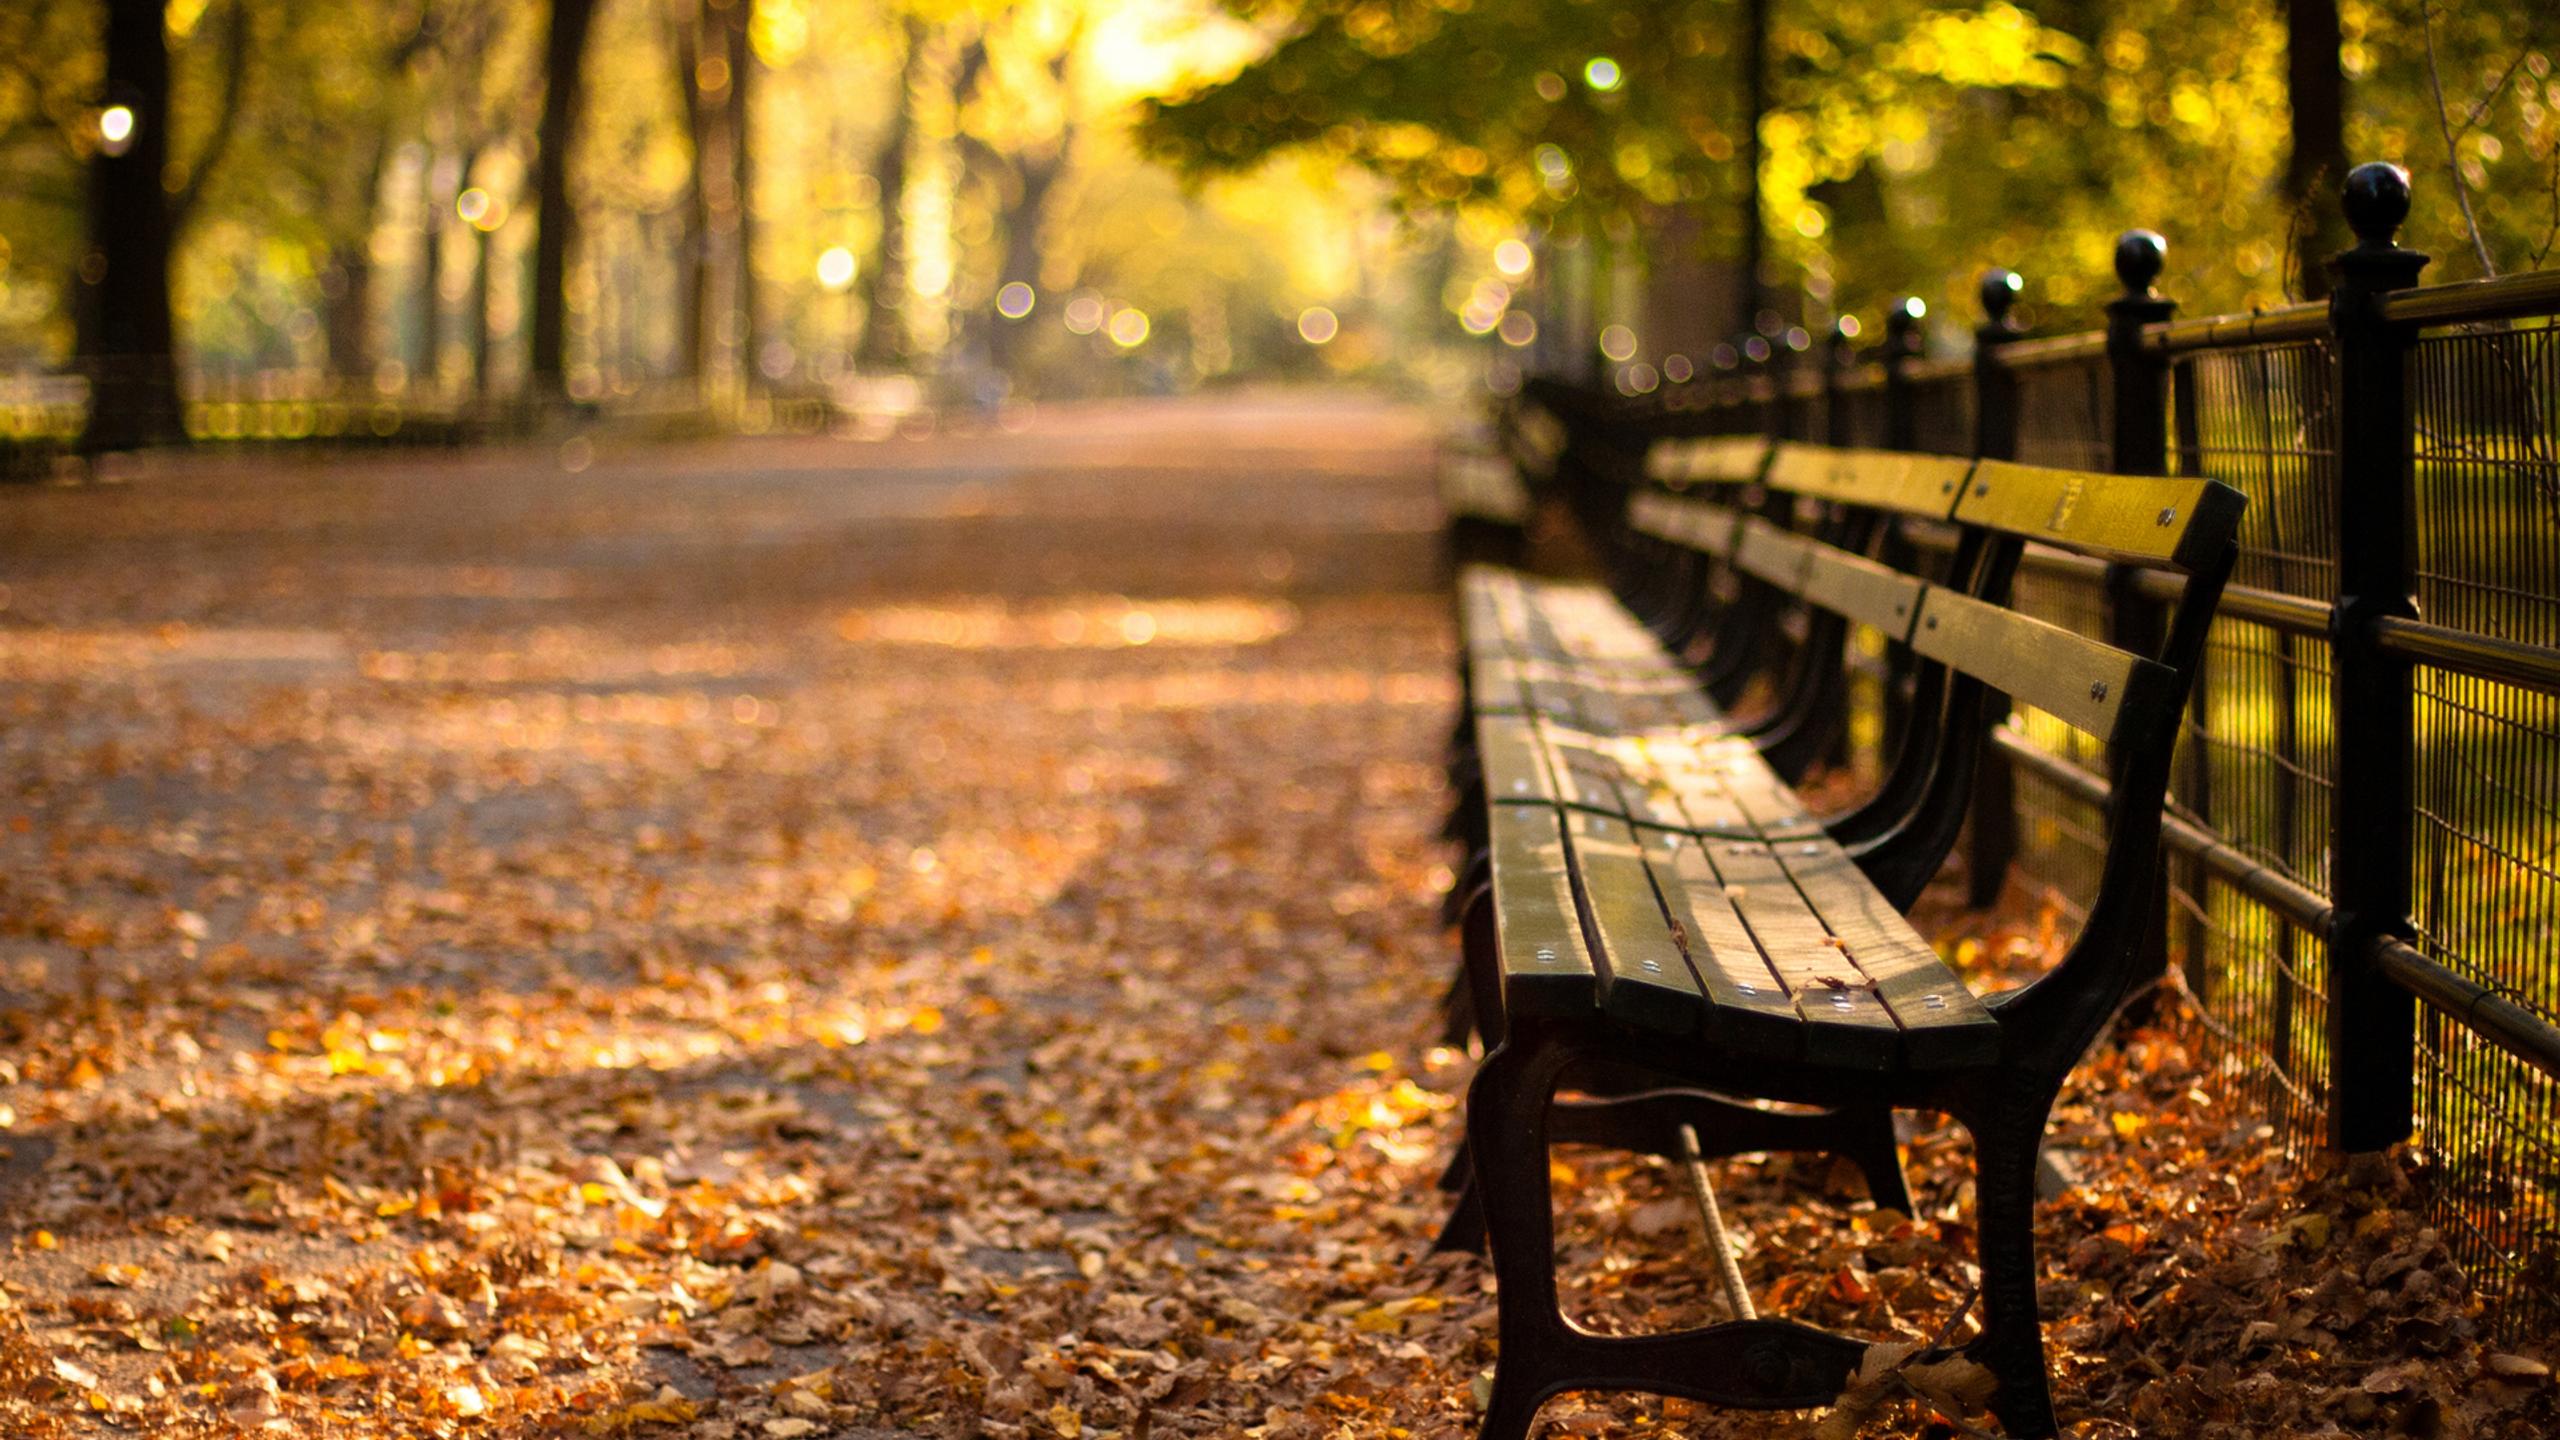 Relaxing time on a bench in the park - Autumn season